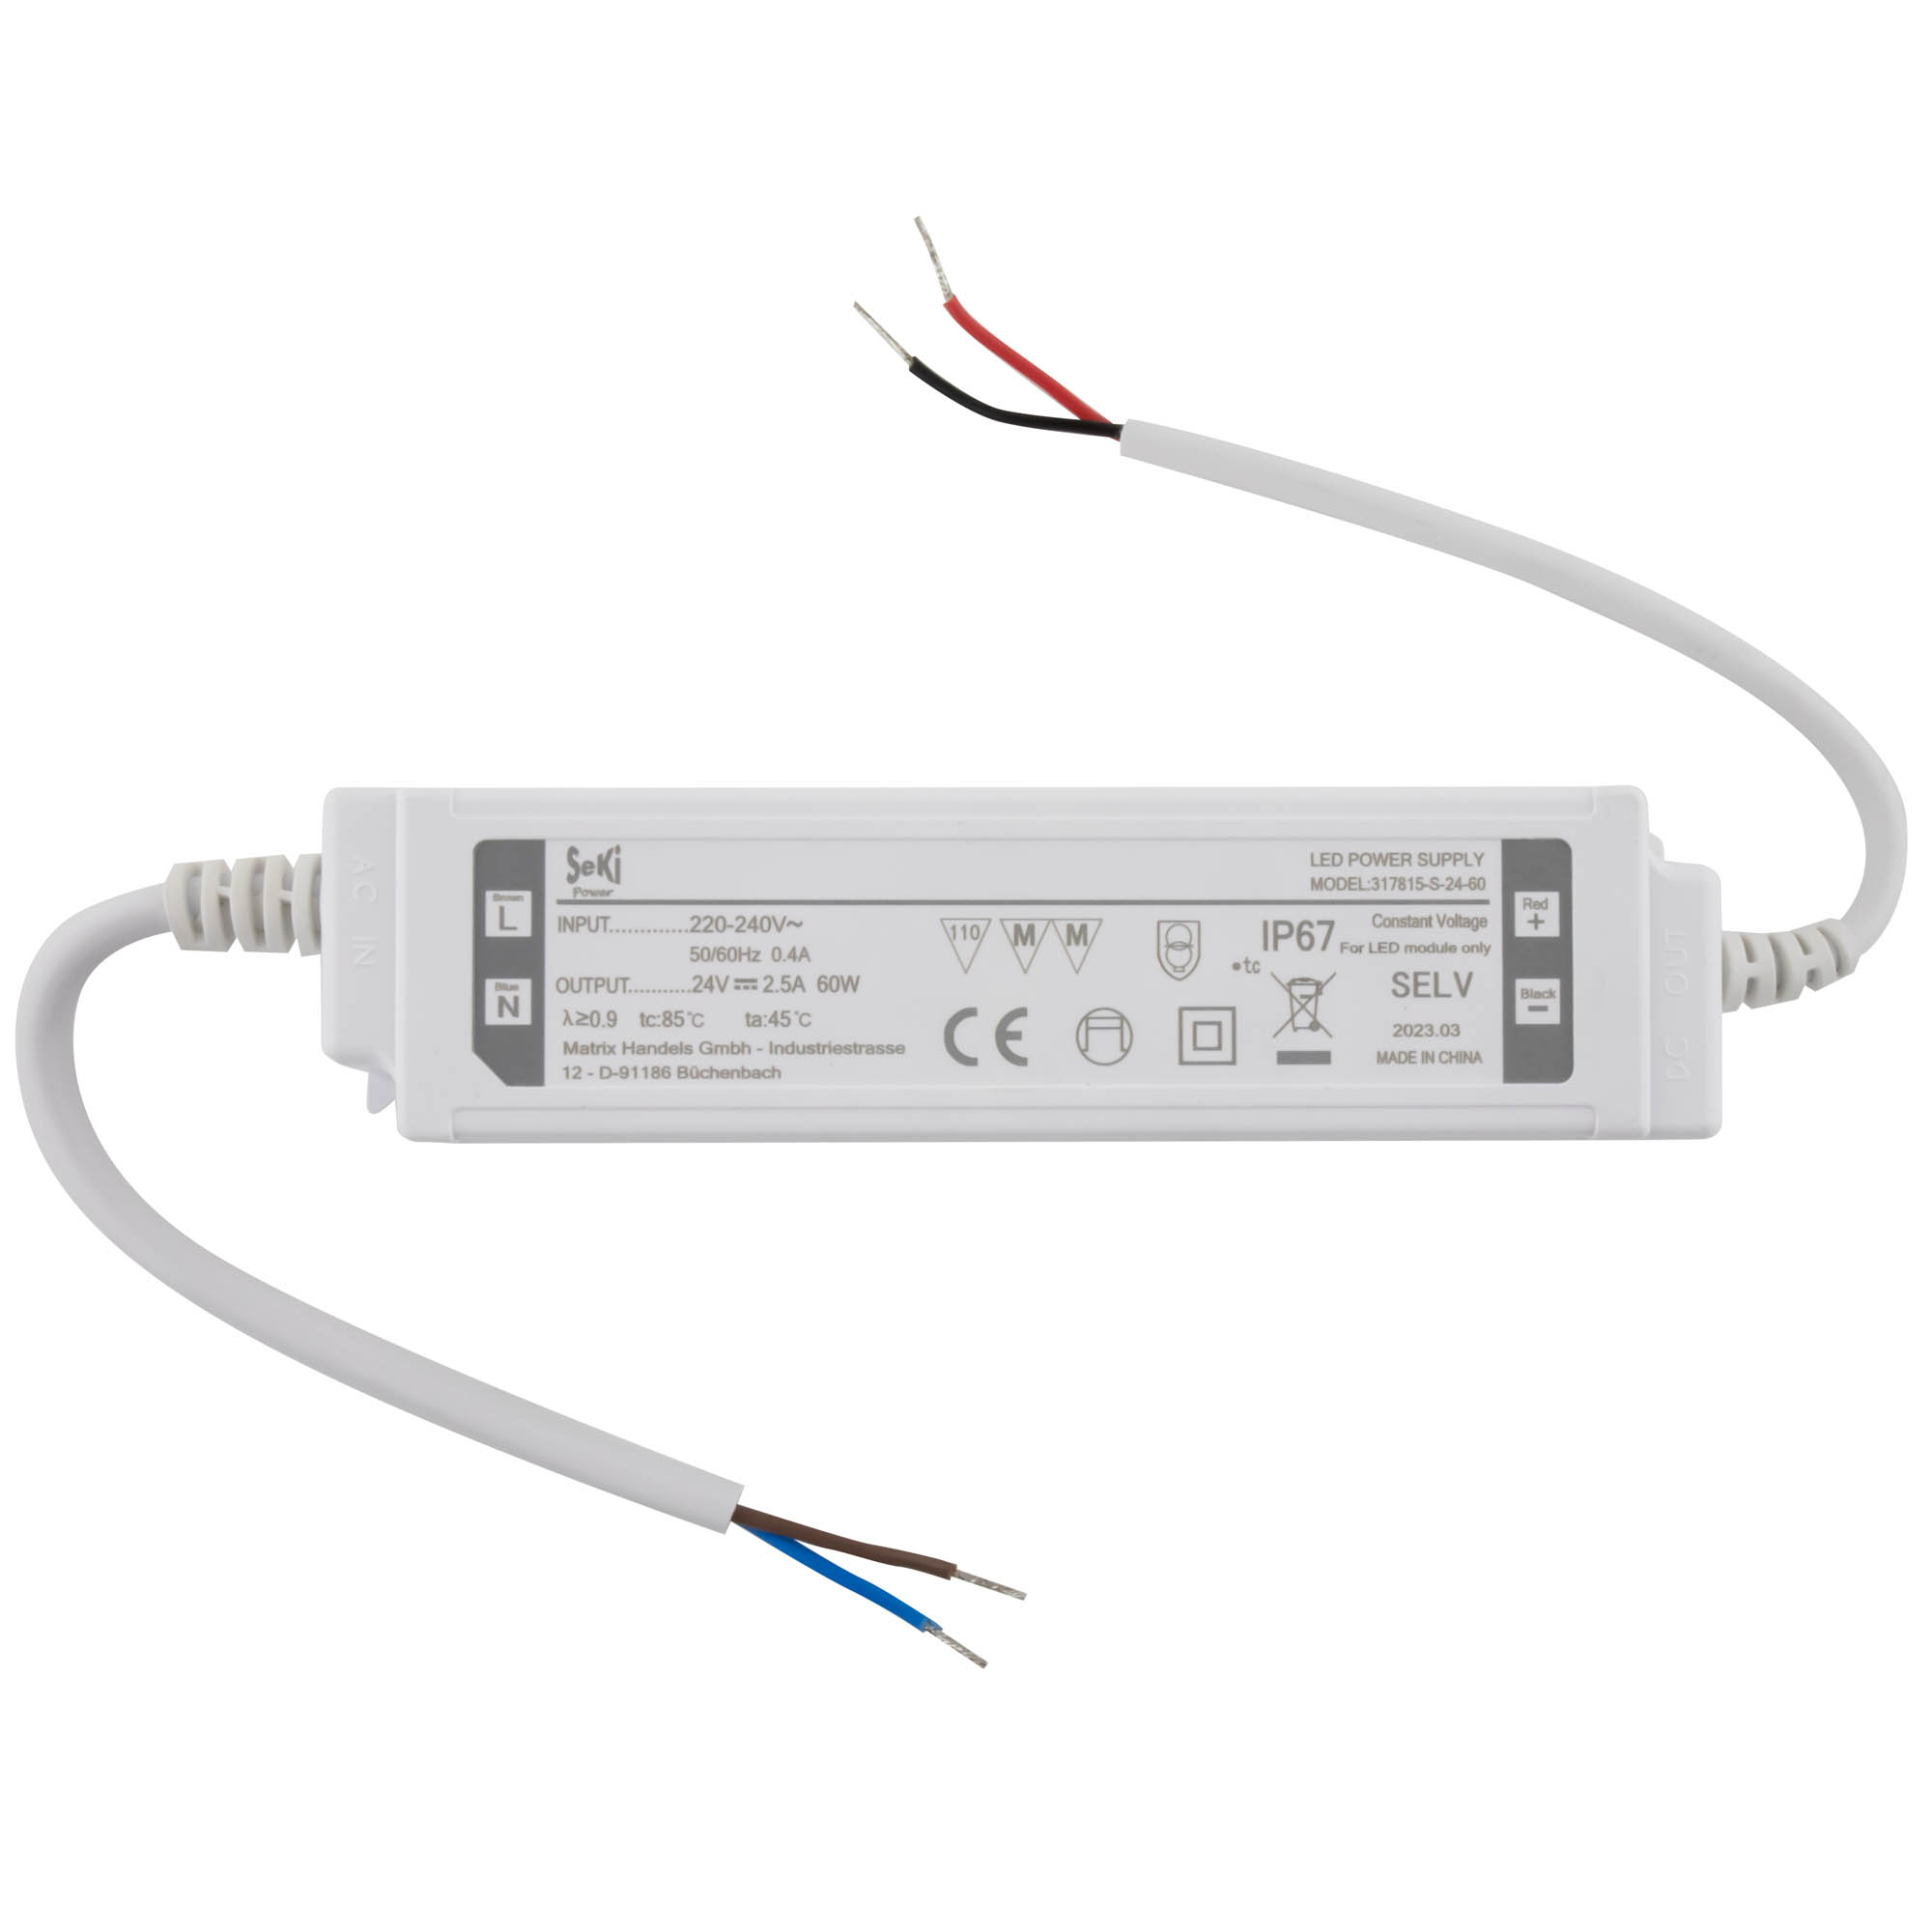 Switching Power Supply S-24-60 - 24V - 2.5A - 60W